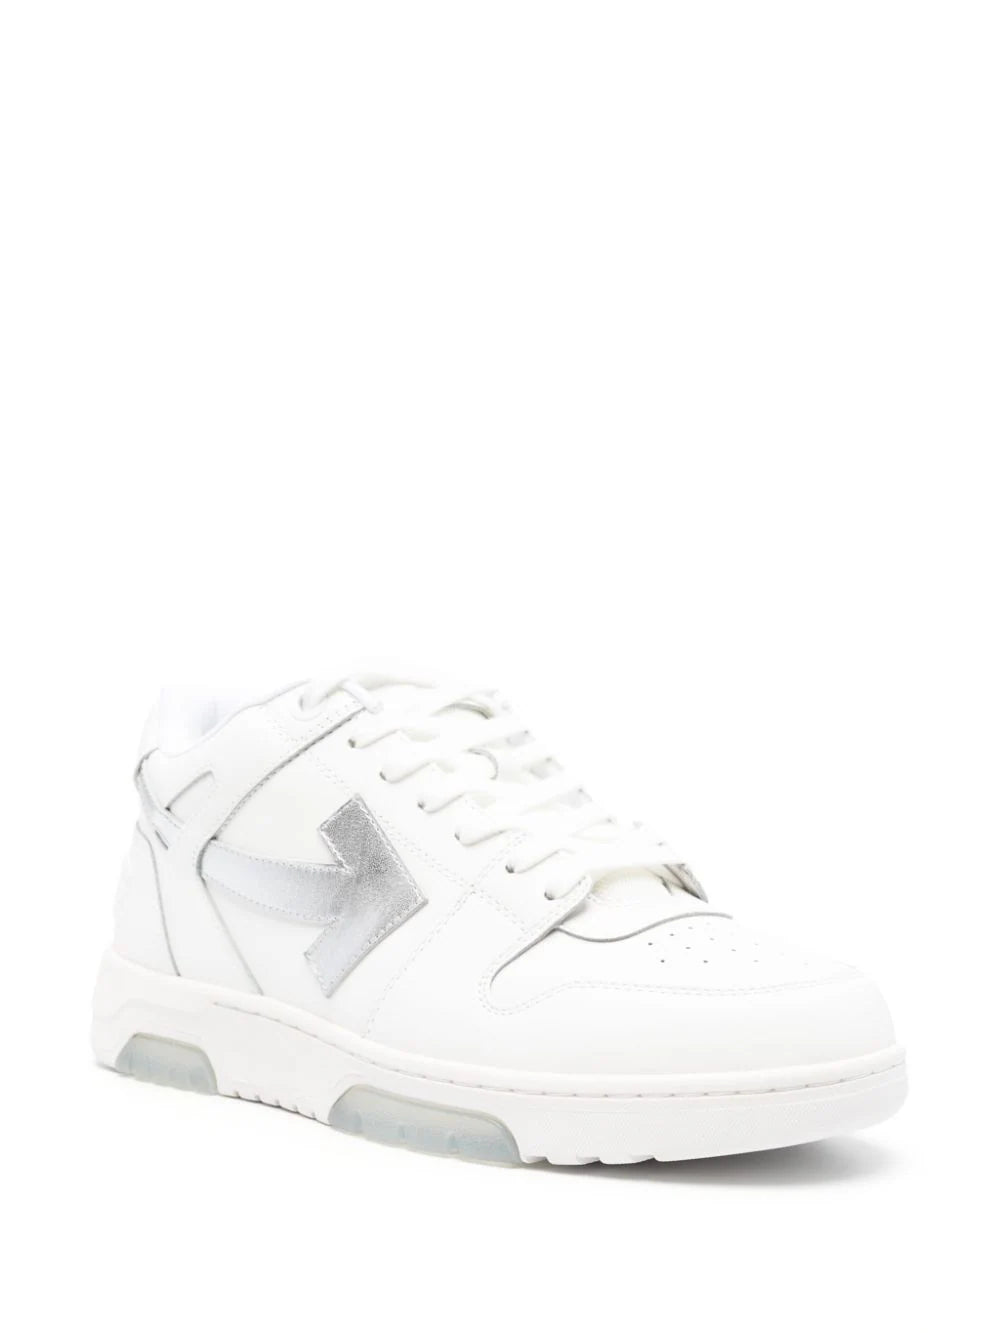 Off-White Out of Office Leather Trainers in White/Silver